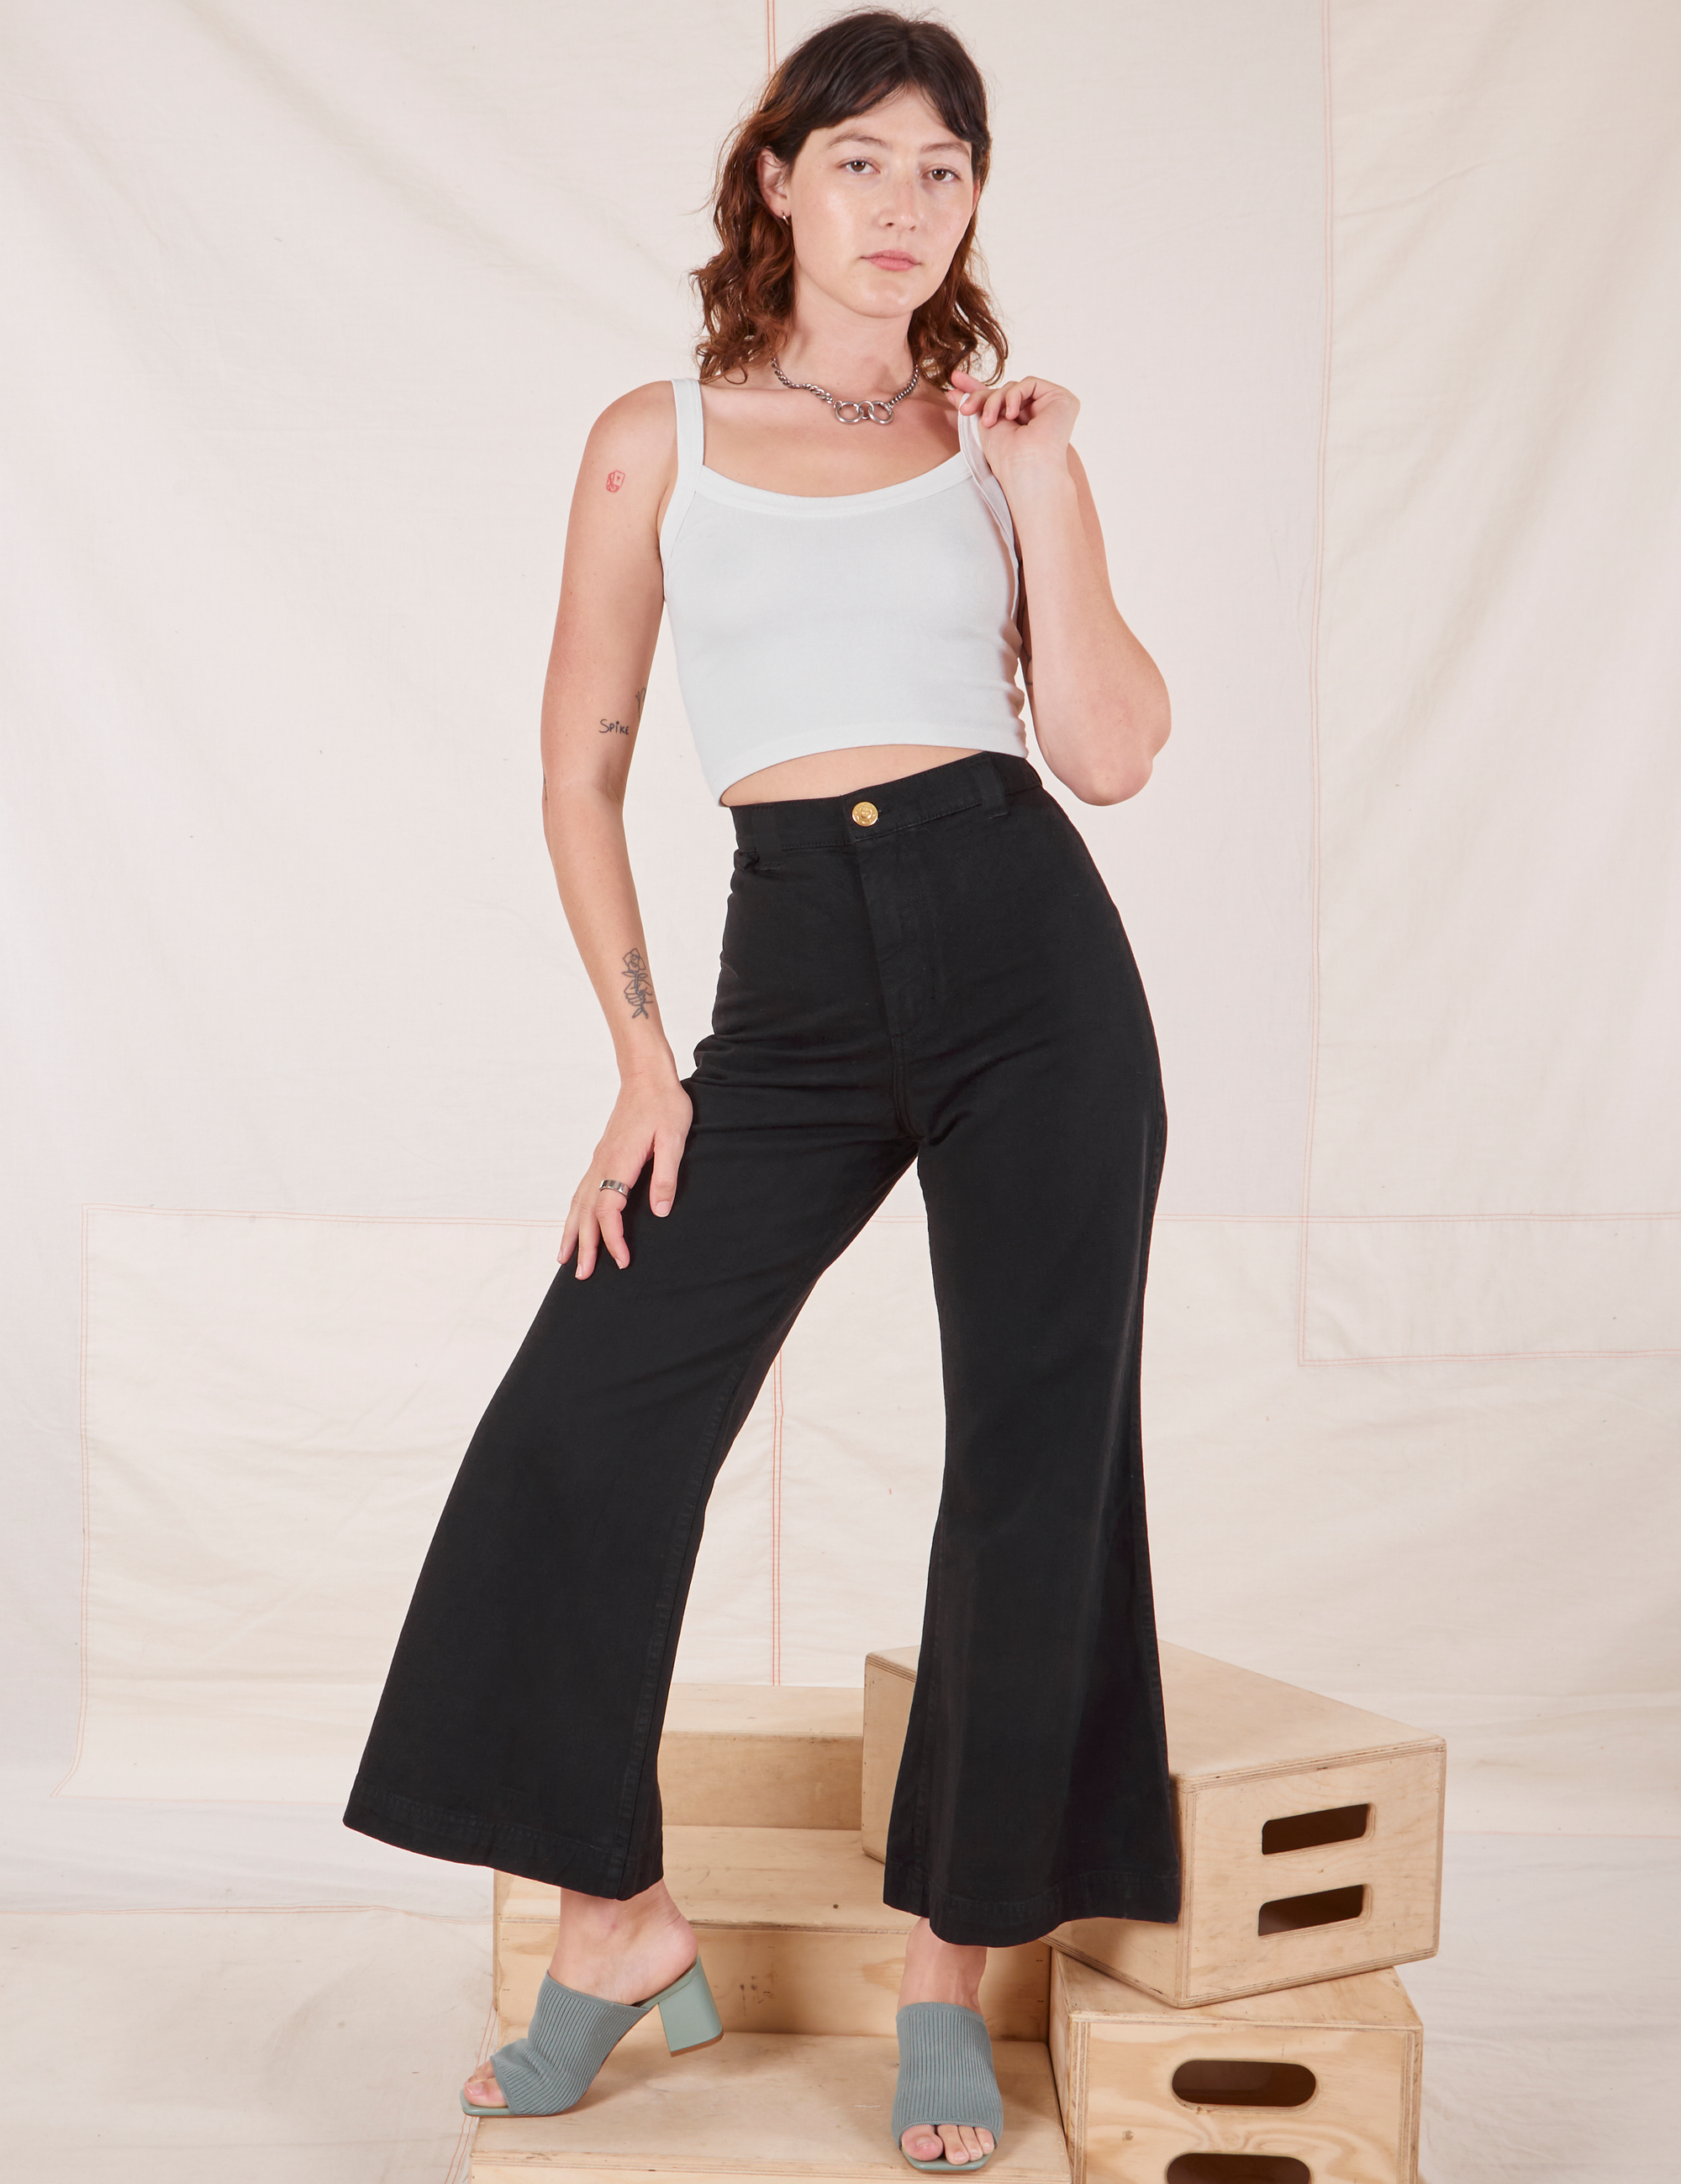 Alex is 5&#39;8&quot; and wearing XXS Bell Bottoms in Basic Black paired with a Cropped Cami in vintage tee off-white